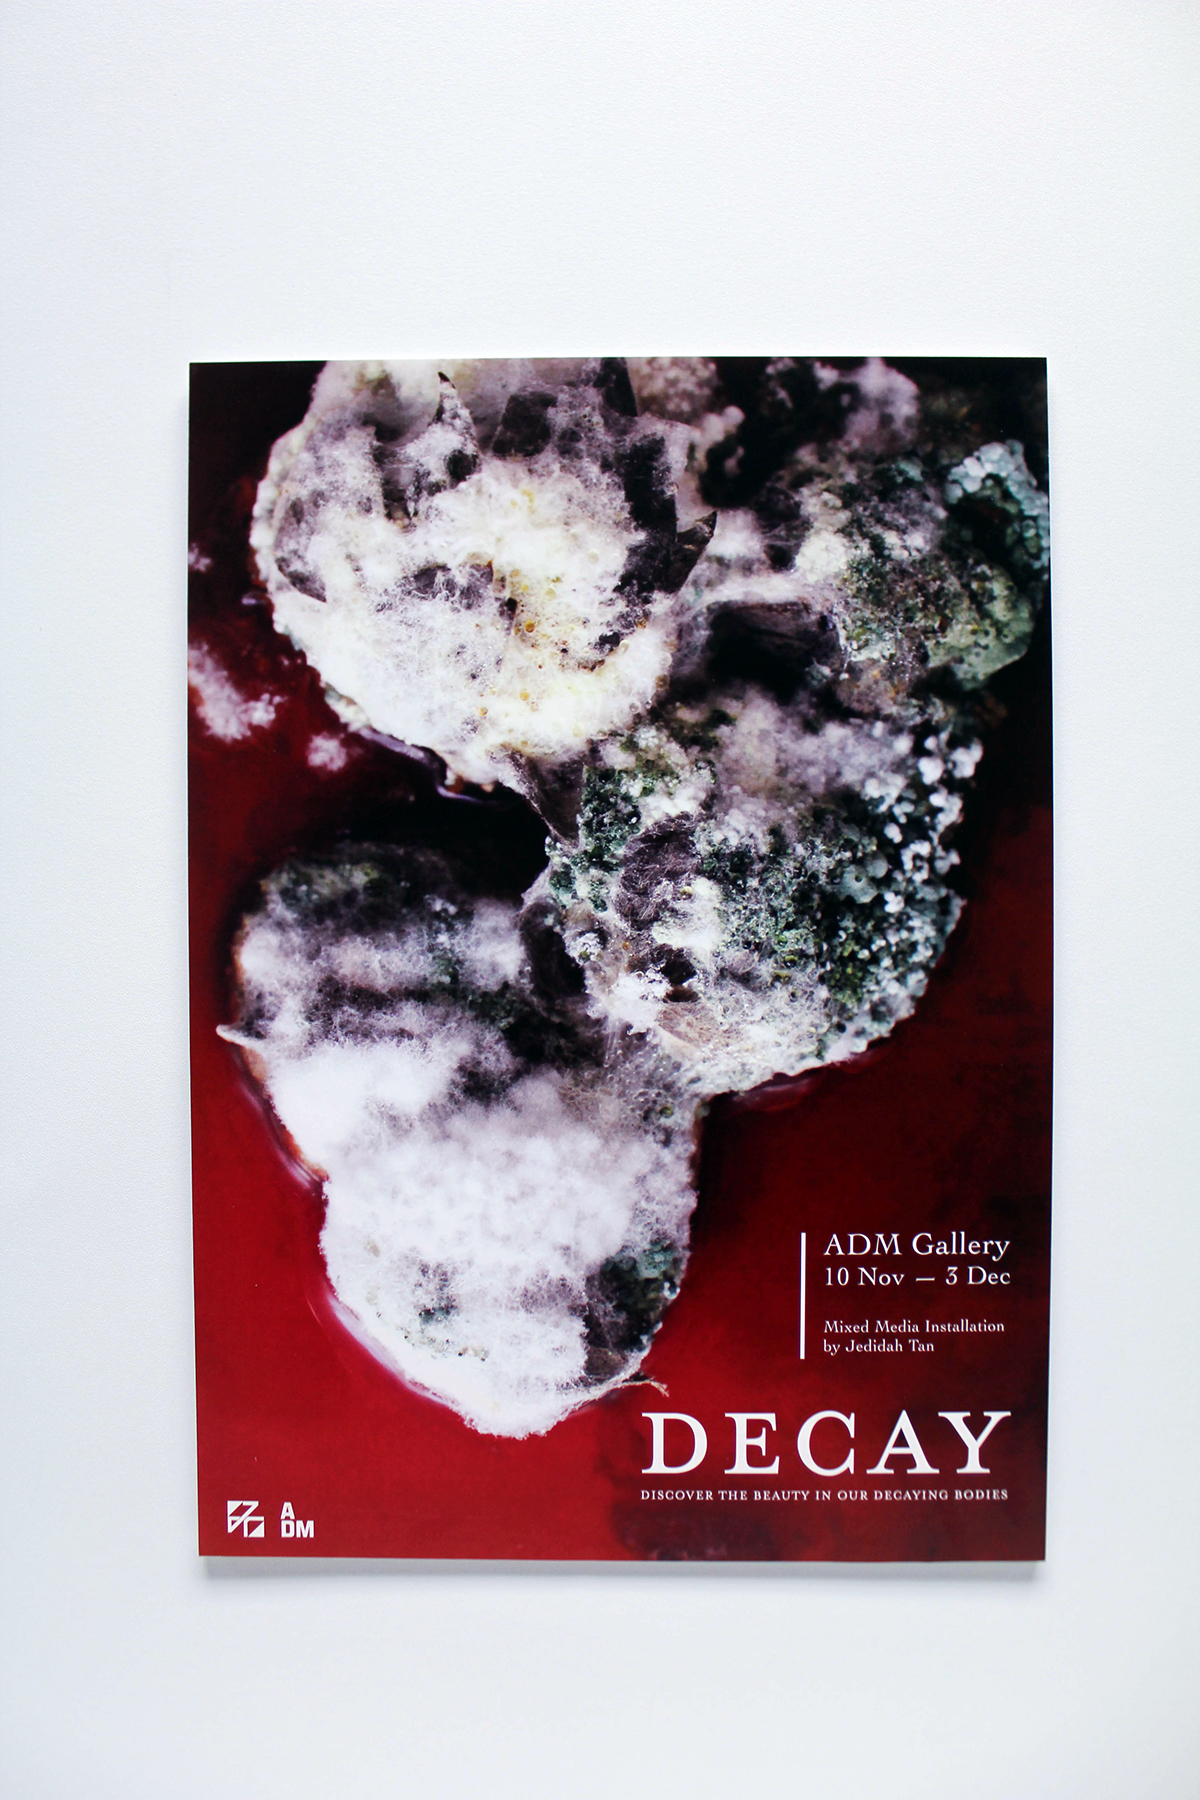 decay human anatomy strawberries bread Flowers rot mould